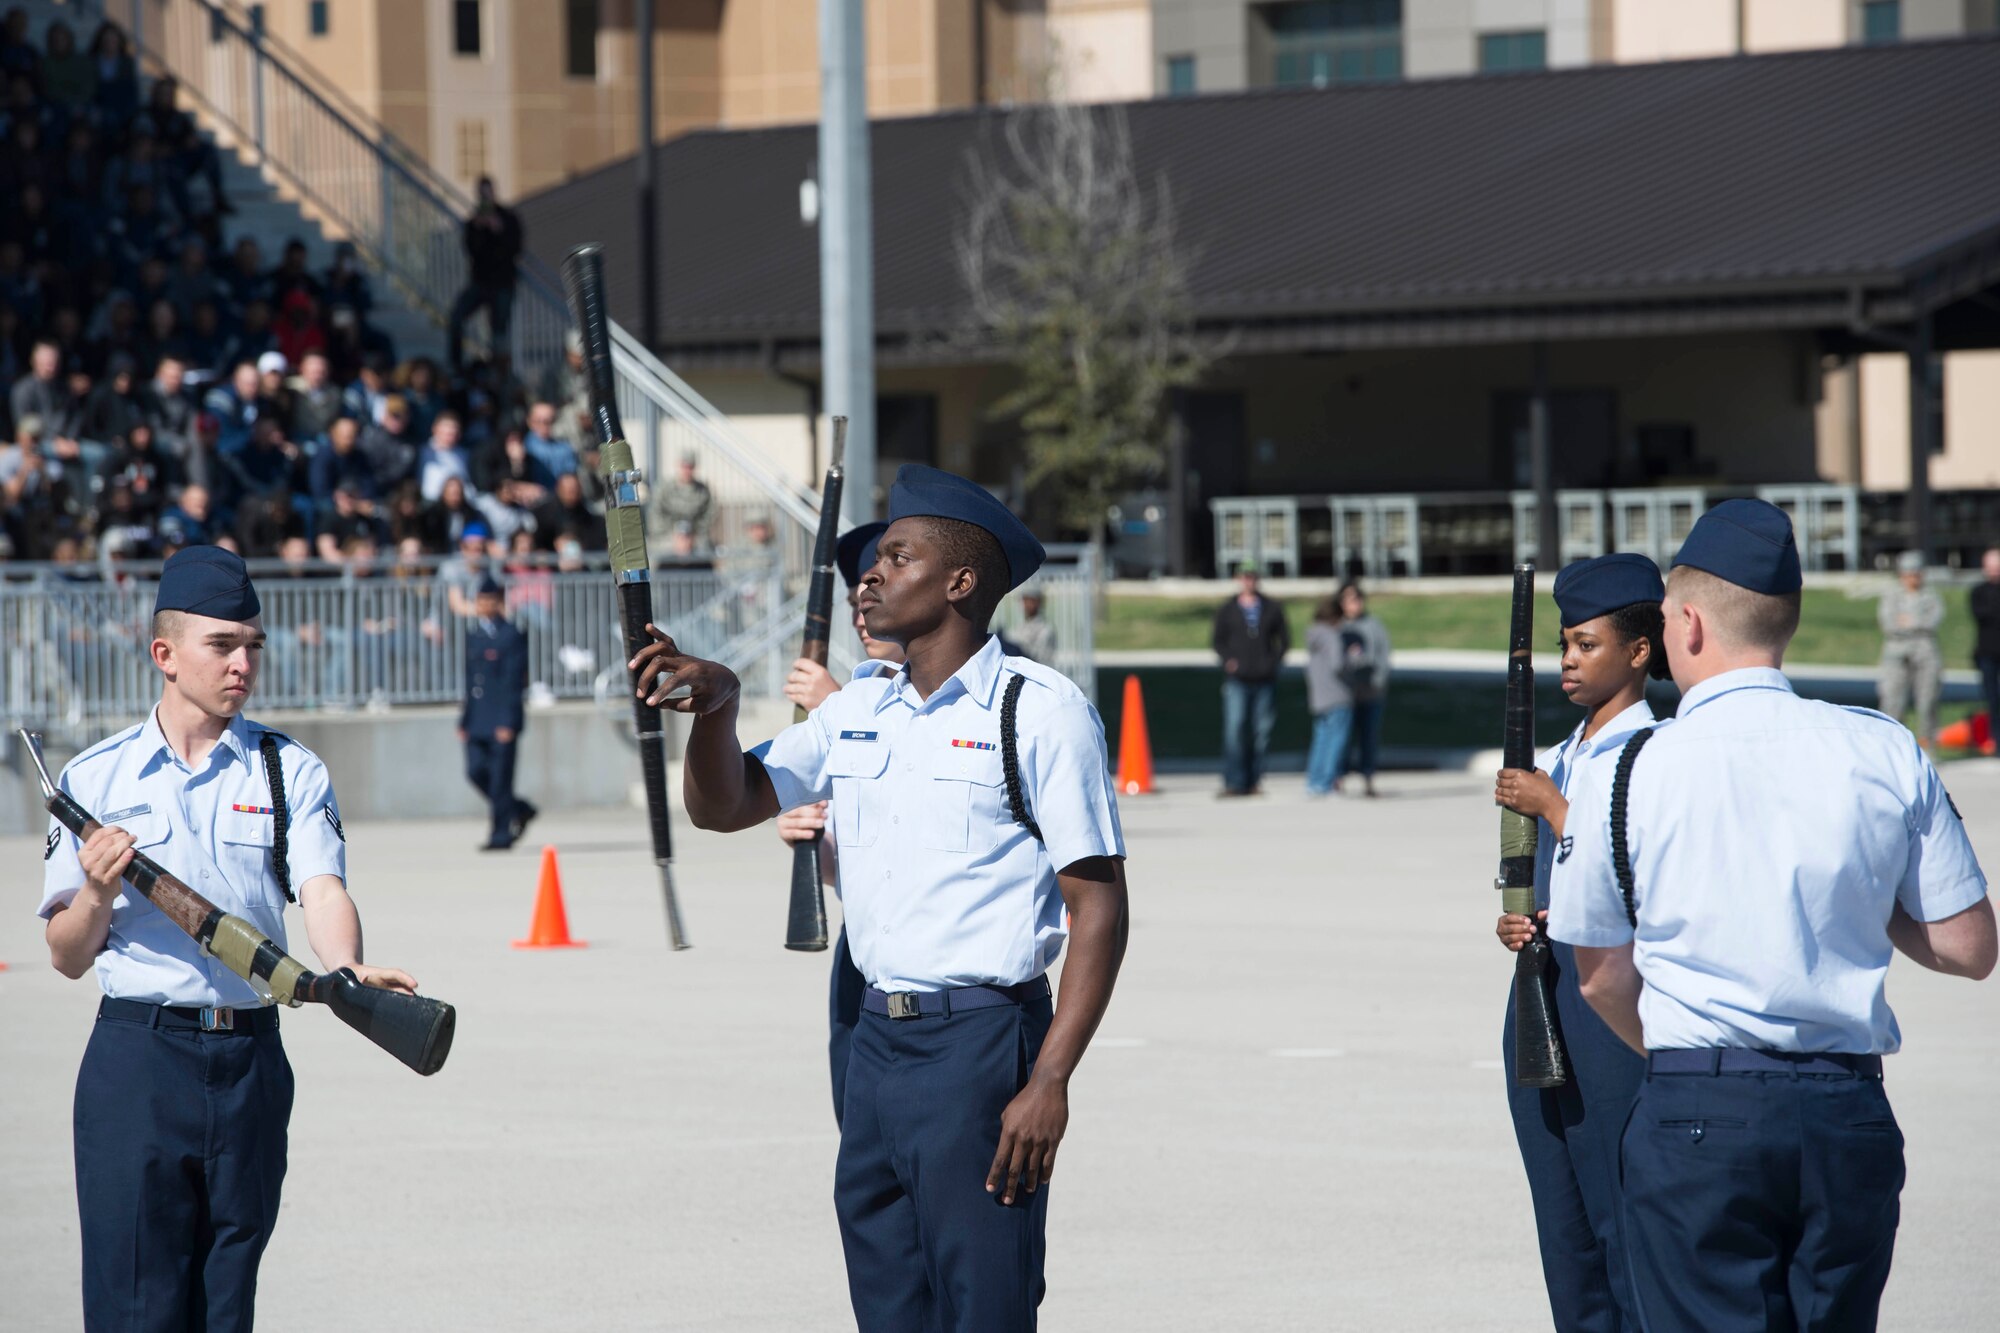 Members of the 343rd Training Squadron drill team perform drill movements in the regulation round of the 37th Training Wing Drill Down Invitational at the Pfingston Reception Center at Joint Base San Antonio-Lackland, Texas, Feb 25, 2017. The competition consisted of an open ranks inspection, a regulation drill performance and a freestyle drill performance from each team.